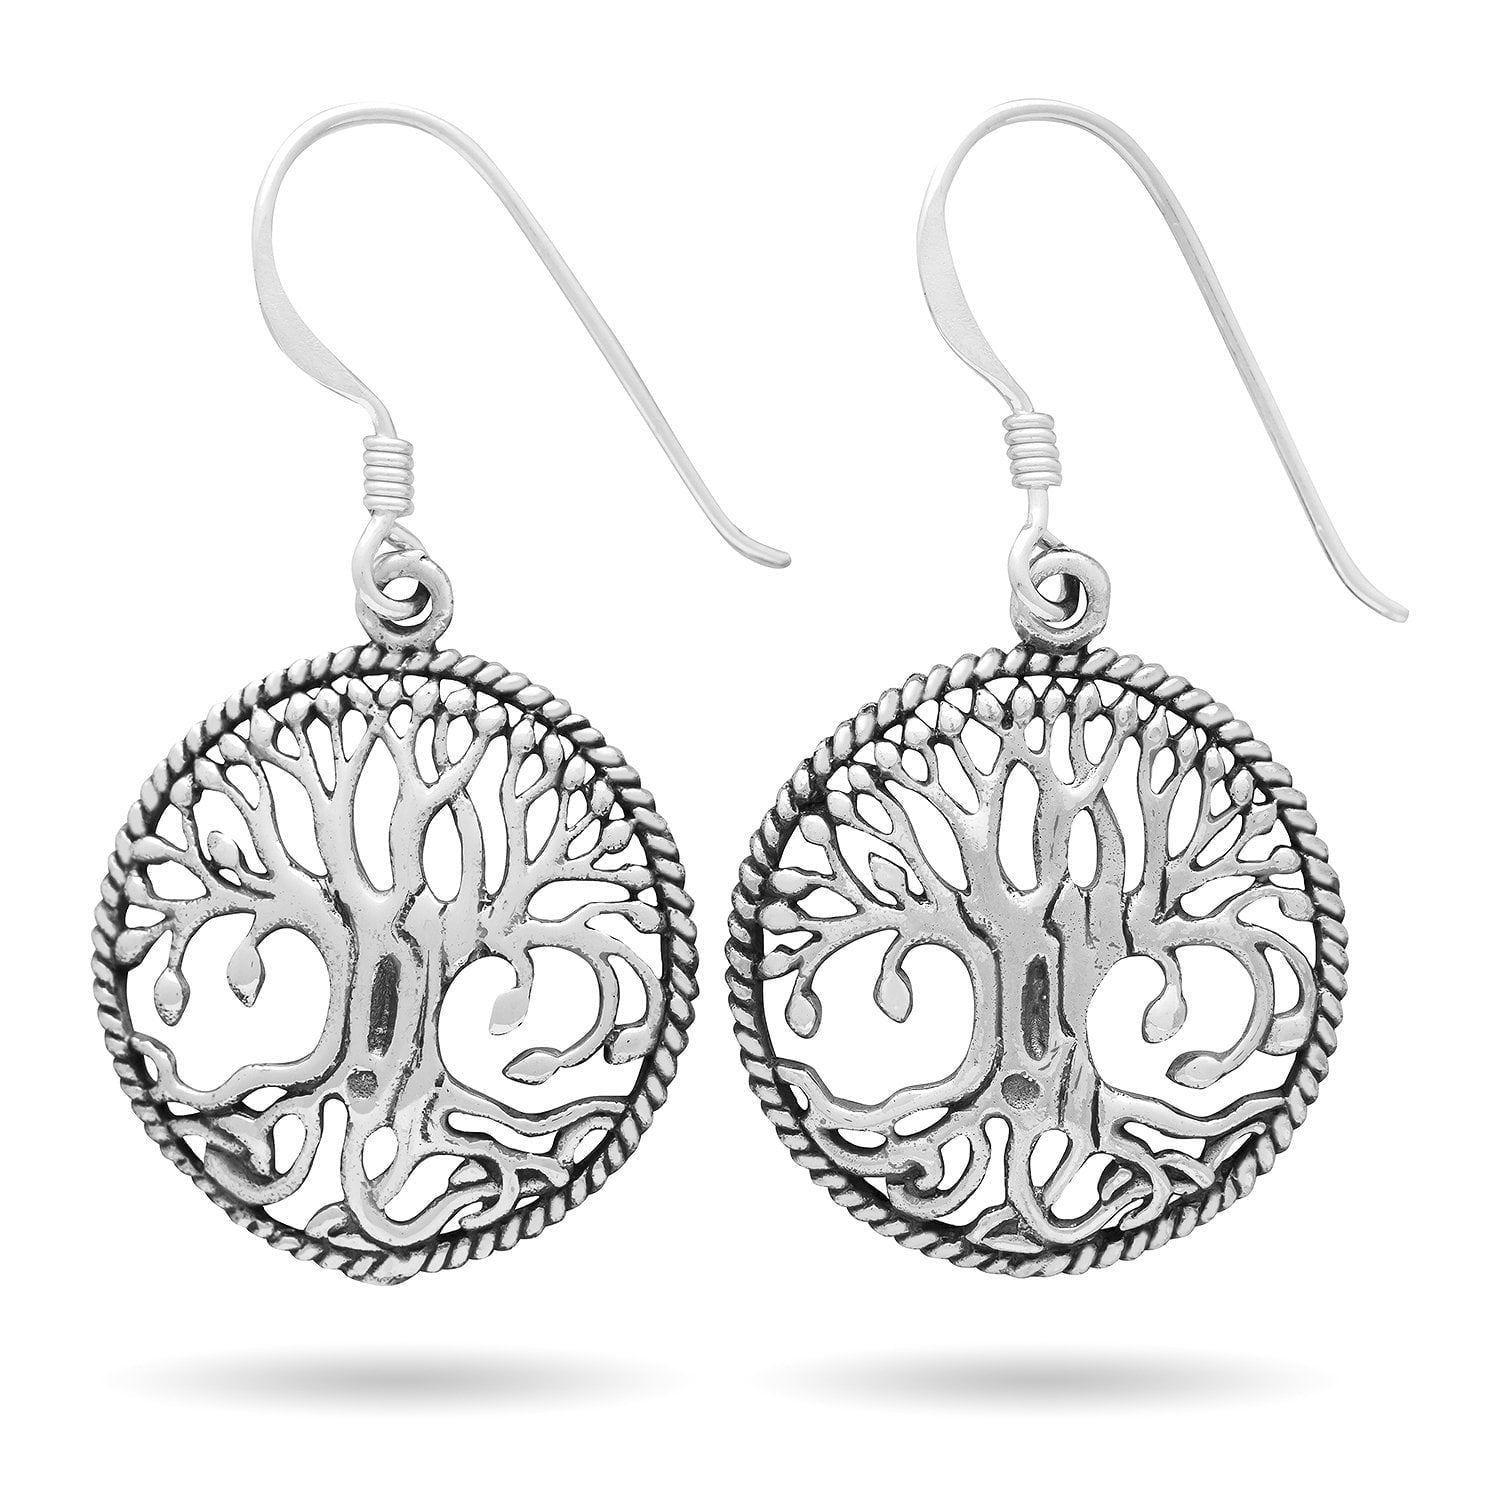 925 Sterling Silver Yggdrasil Norse Tree of Life Viking Jewelry Earrings Set - SilverMania925